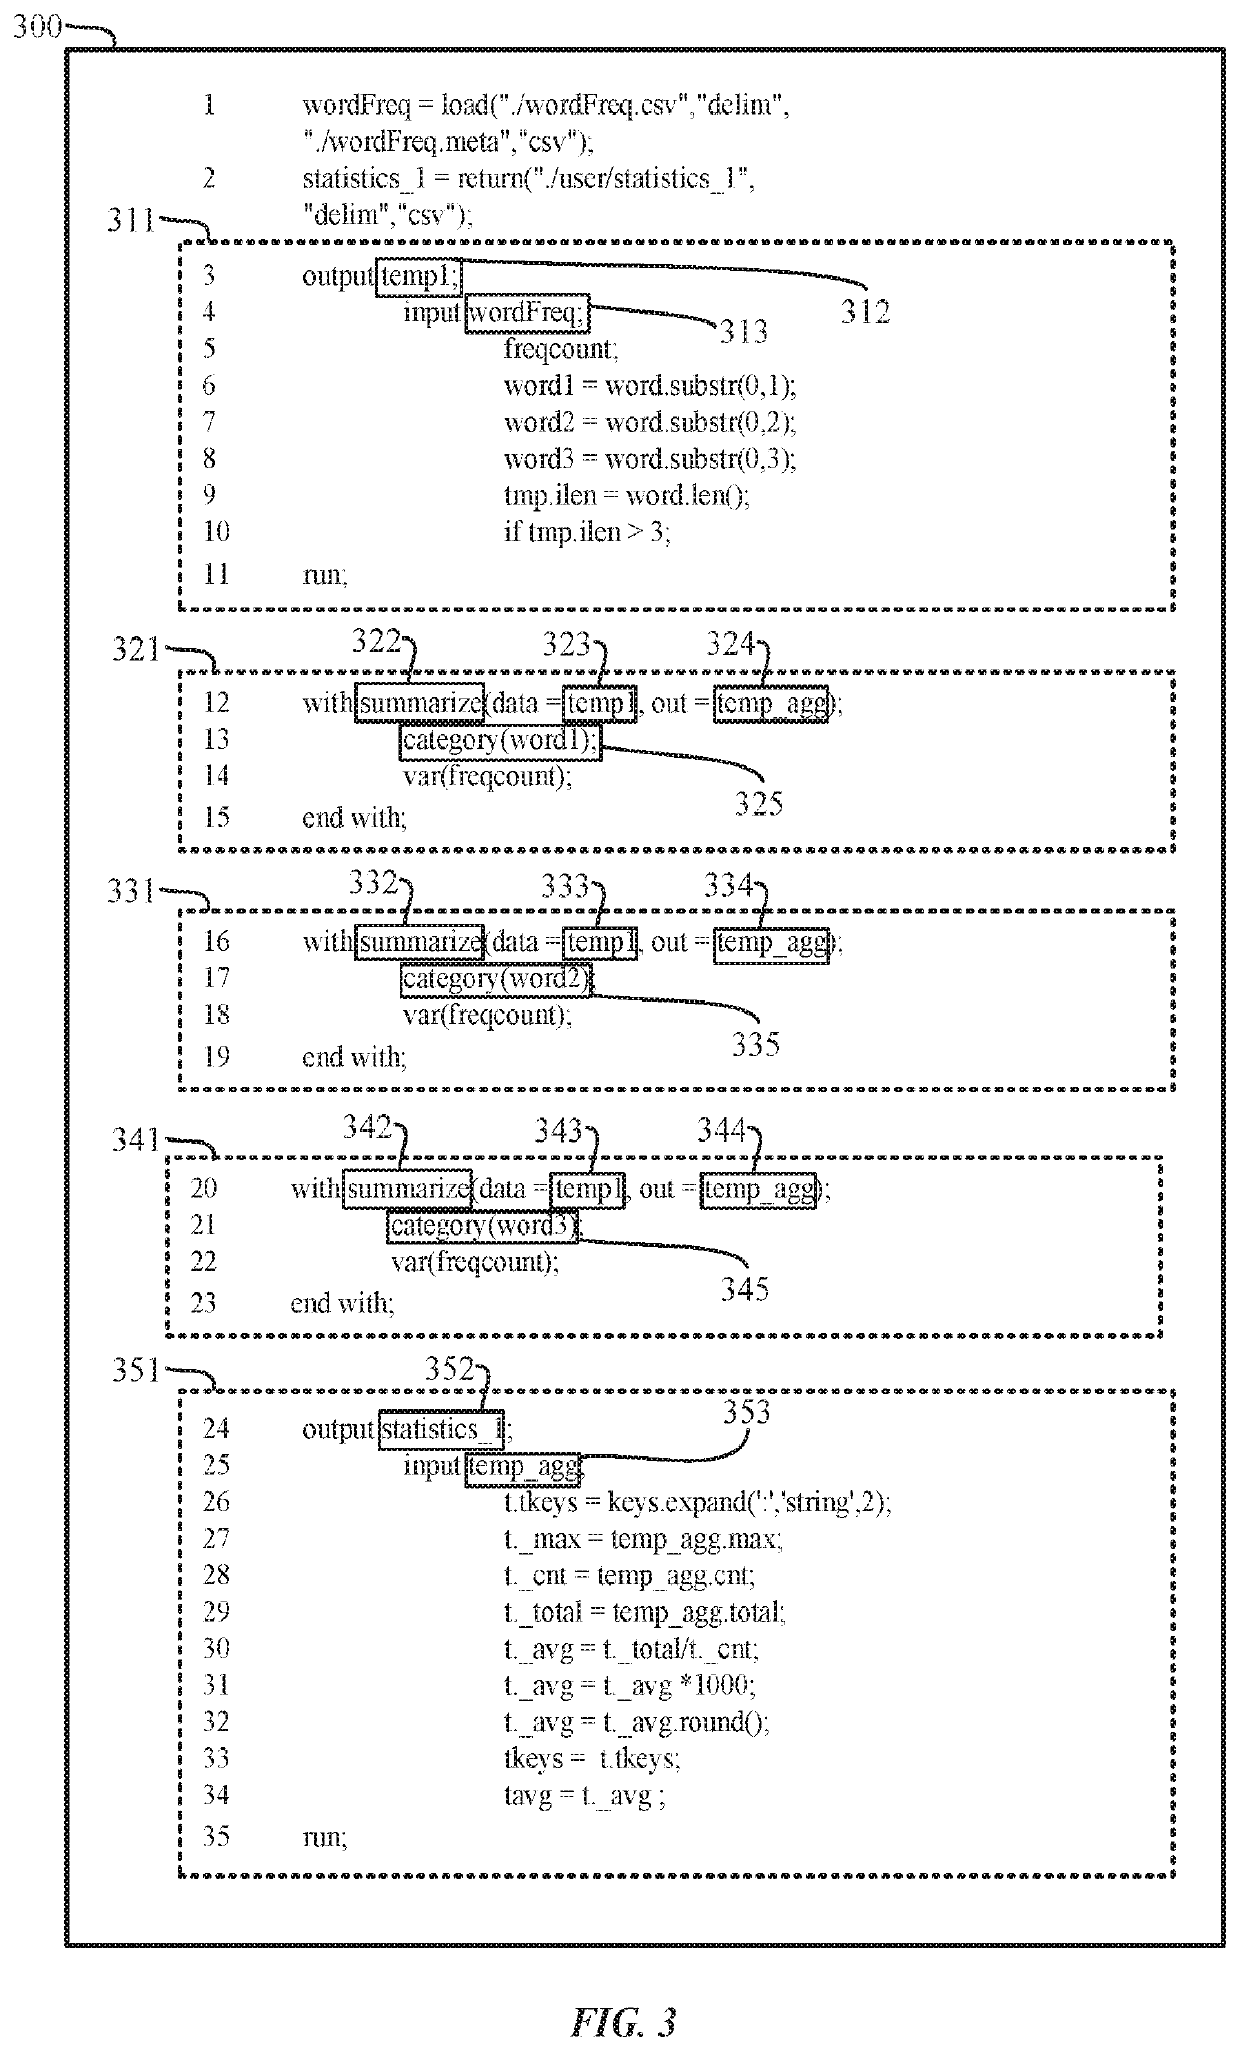 Systems and methods for generating distributed software packages using non-distributed source code